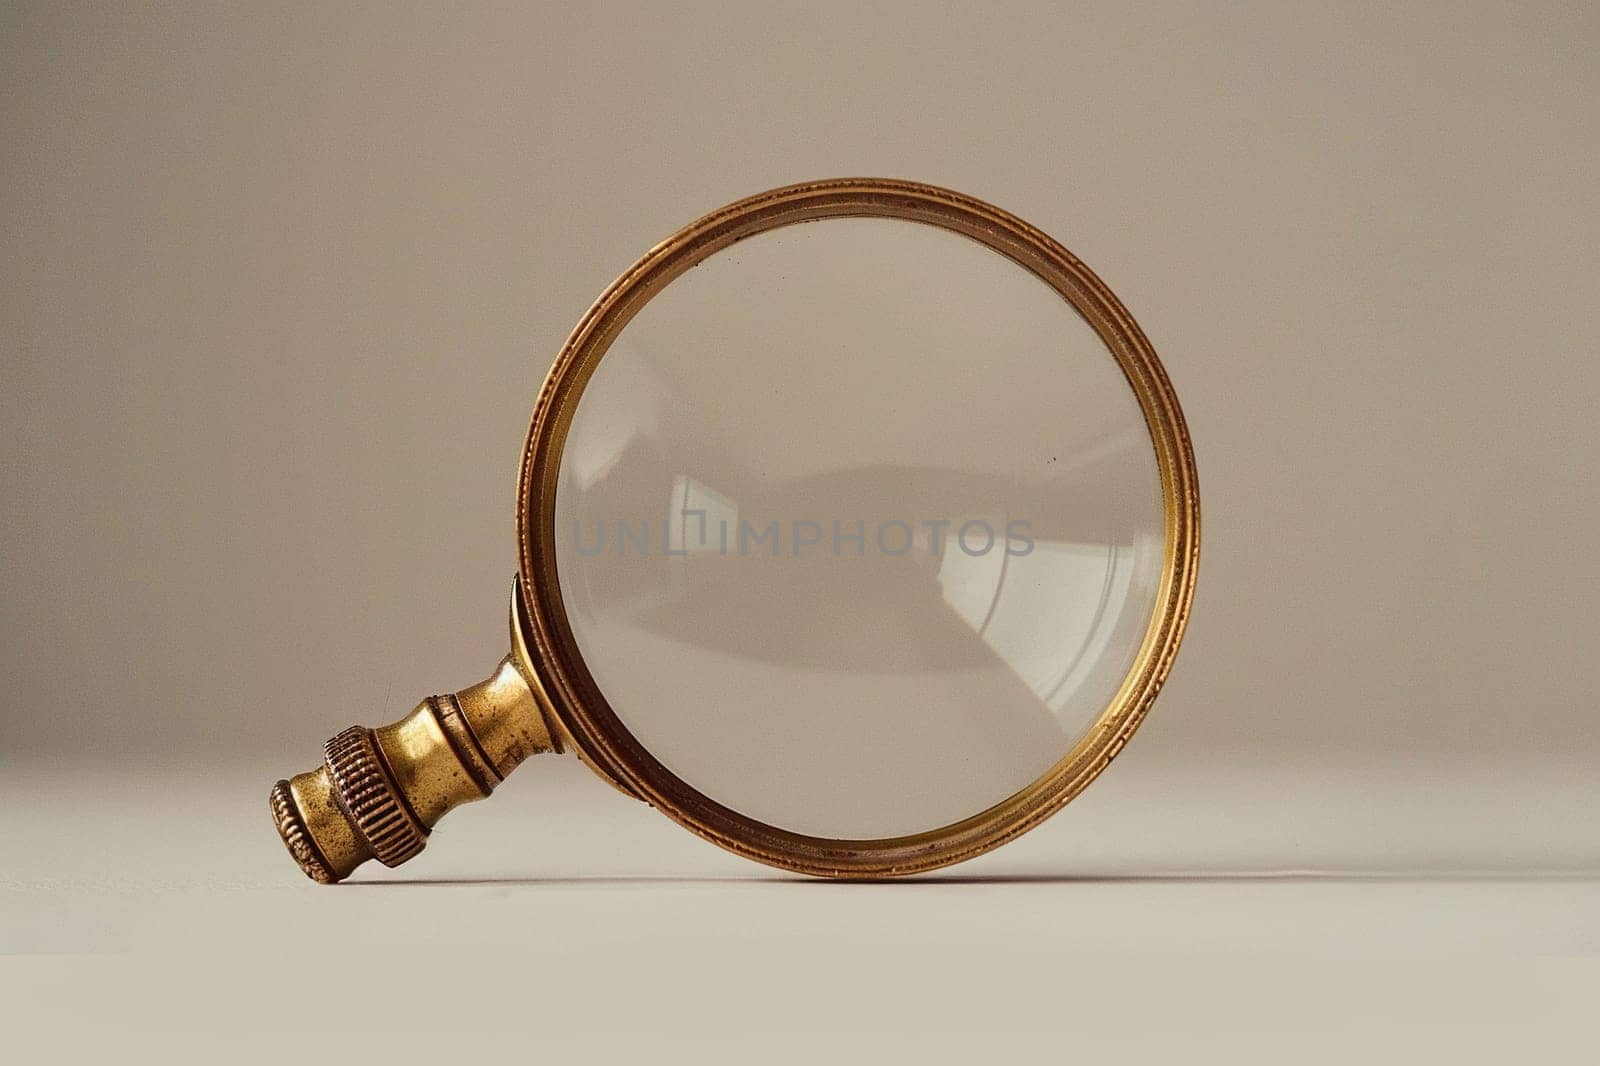 Magnifying round glass with a wooden handle on a light background. Concept of search, research.